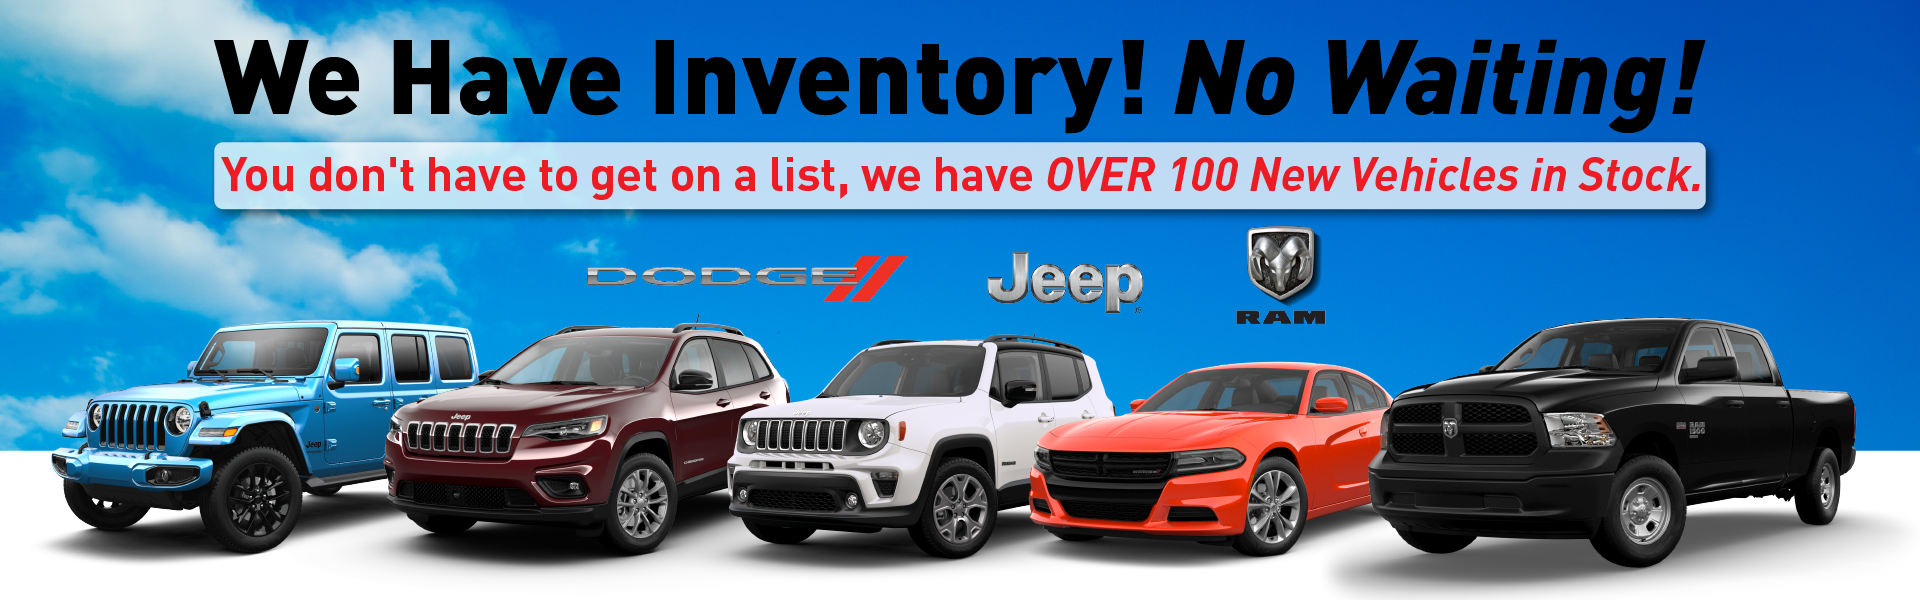 We Have Inventory! No Waiting!